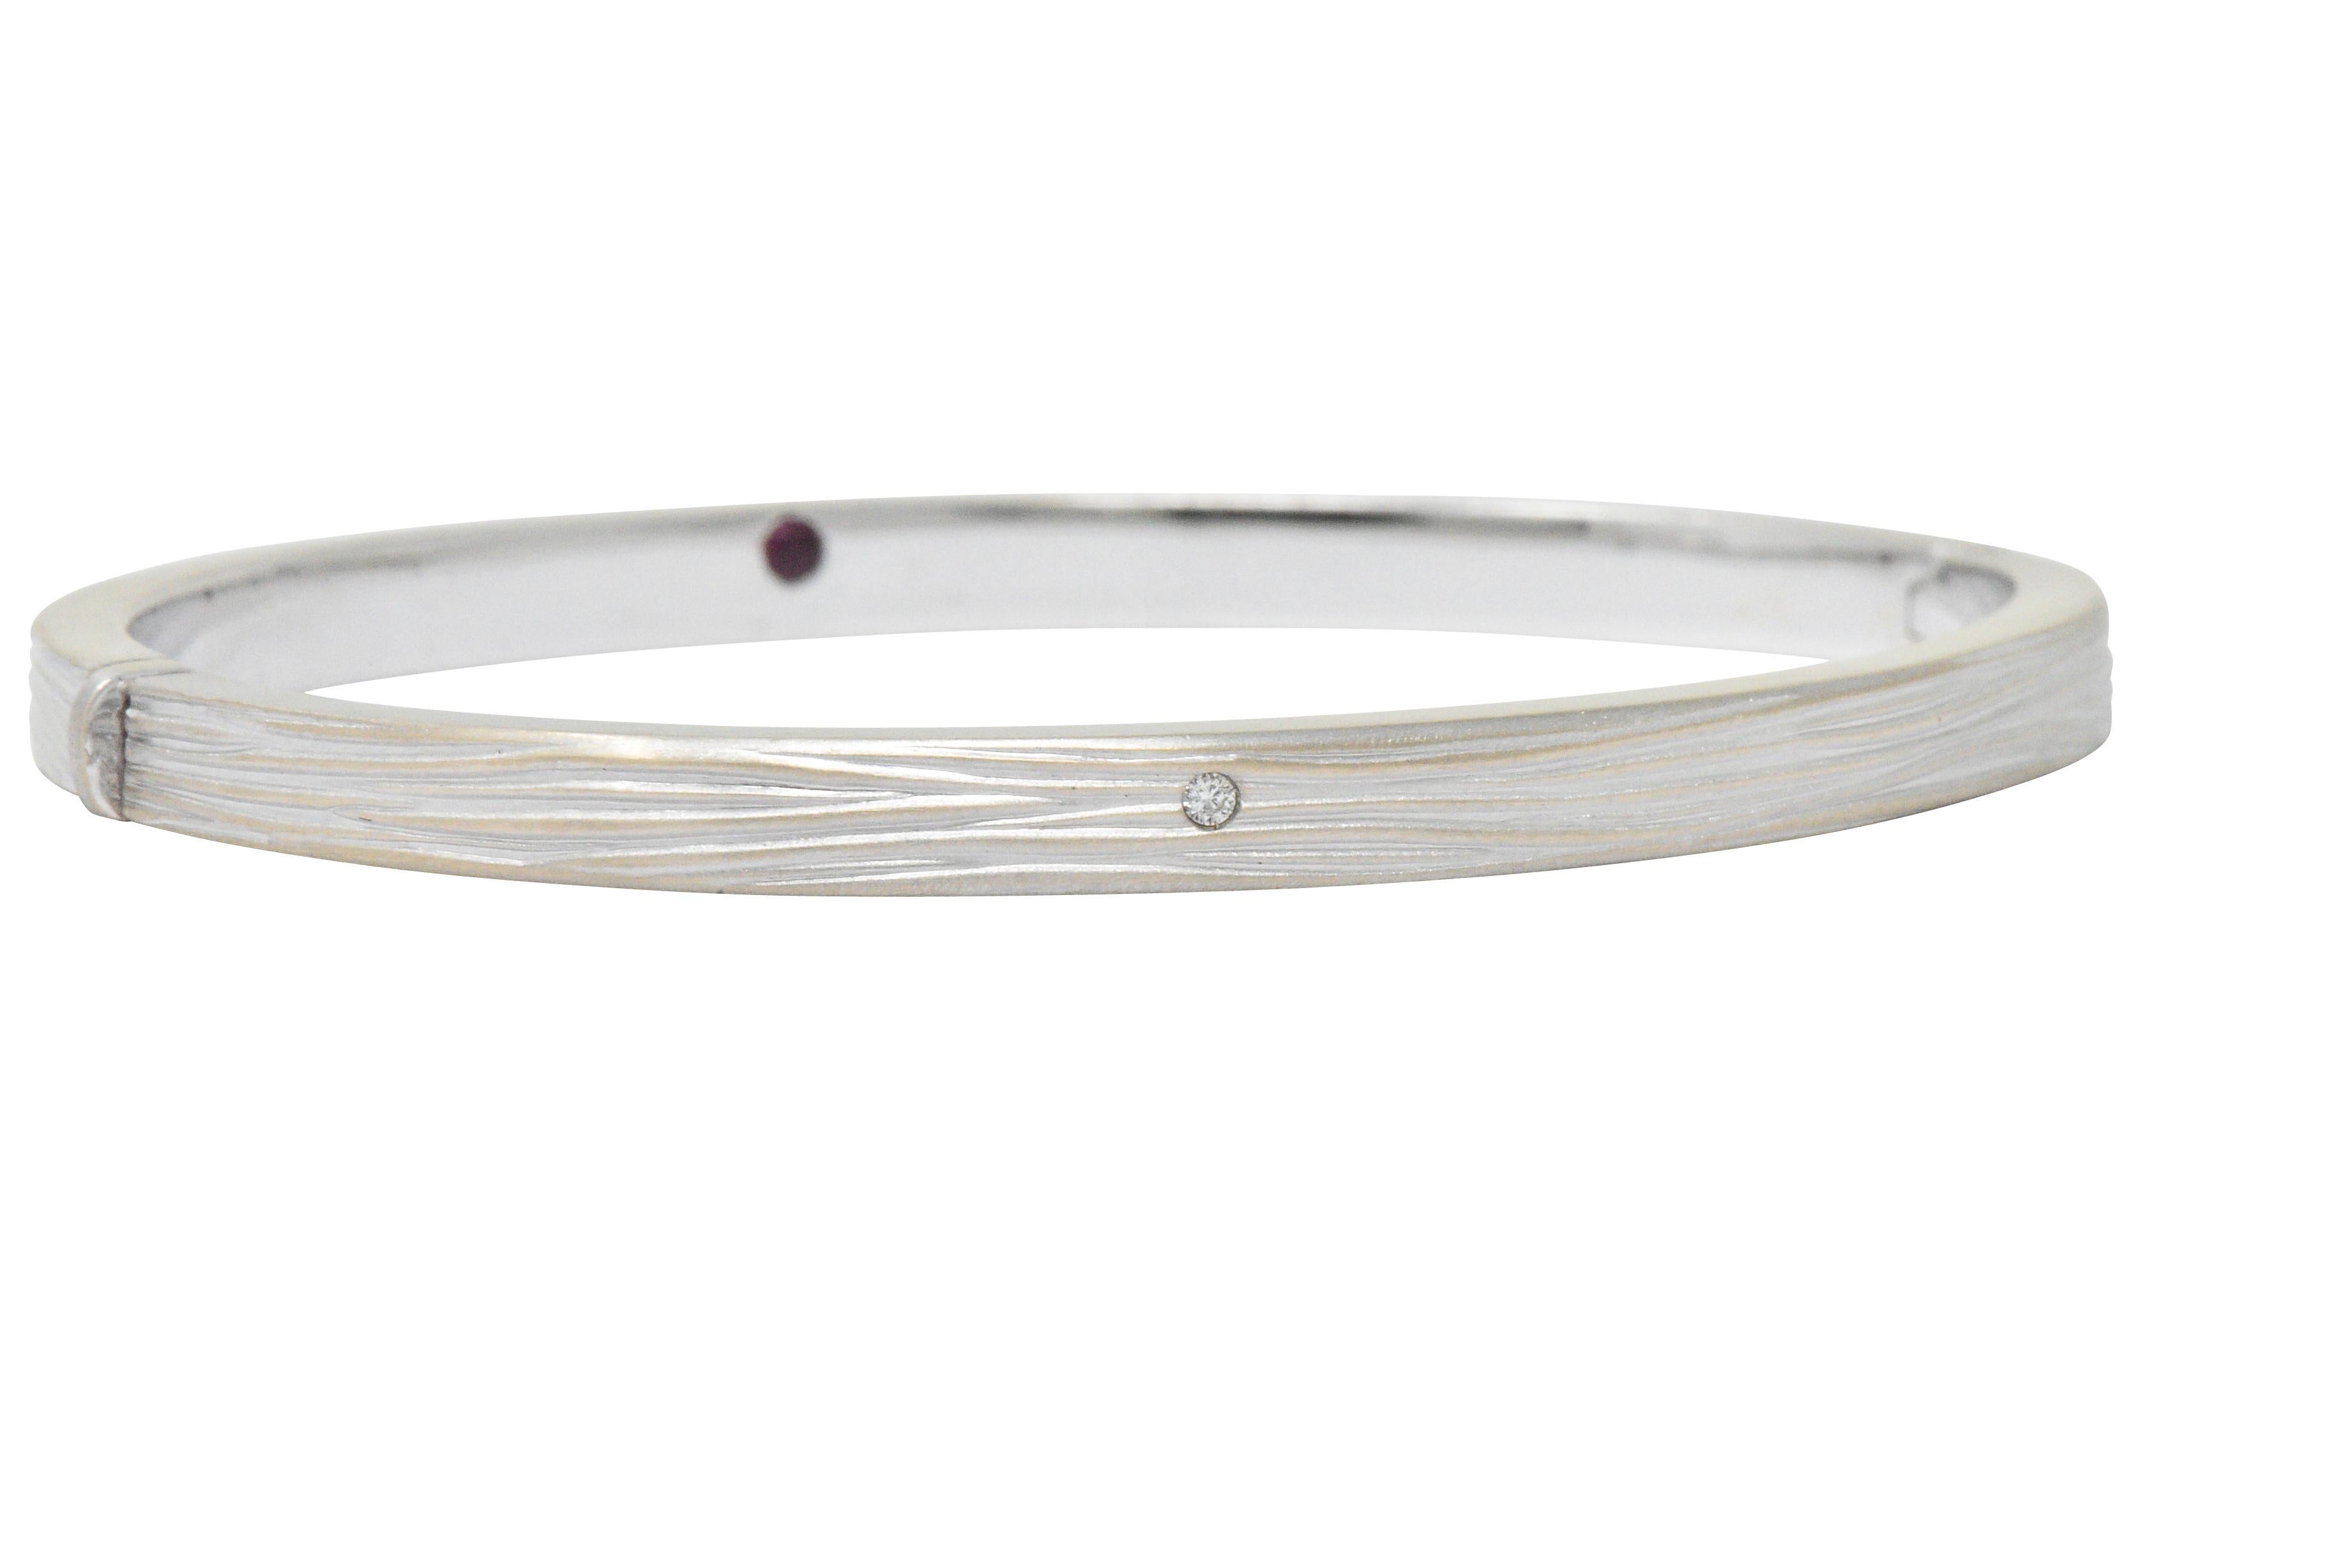 Hinged bangle style bracelet featuring wrinkled elephant skin texture and matte finish

Flush set to front with a subtle round brilliant cut diamond accent weighing approximately 0.01 carat; eye-clean and white

Completed by concealed clasp and